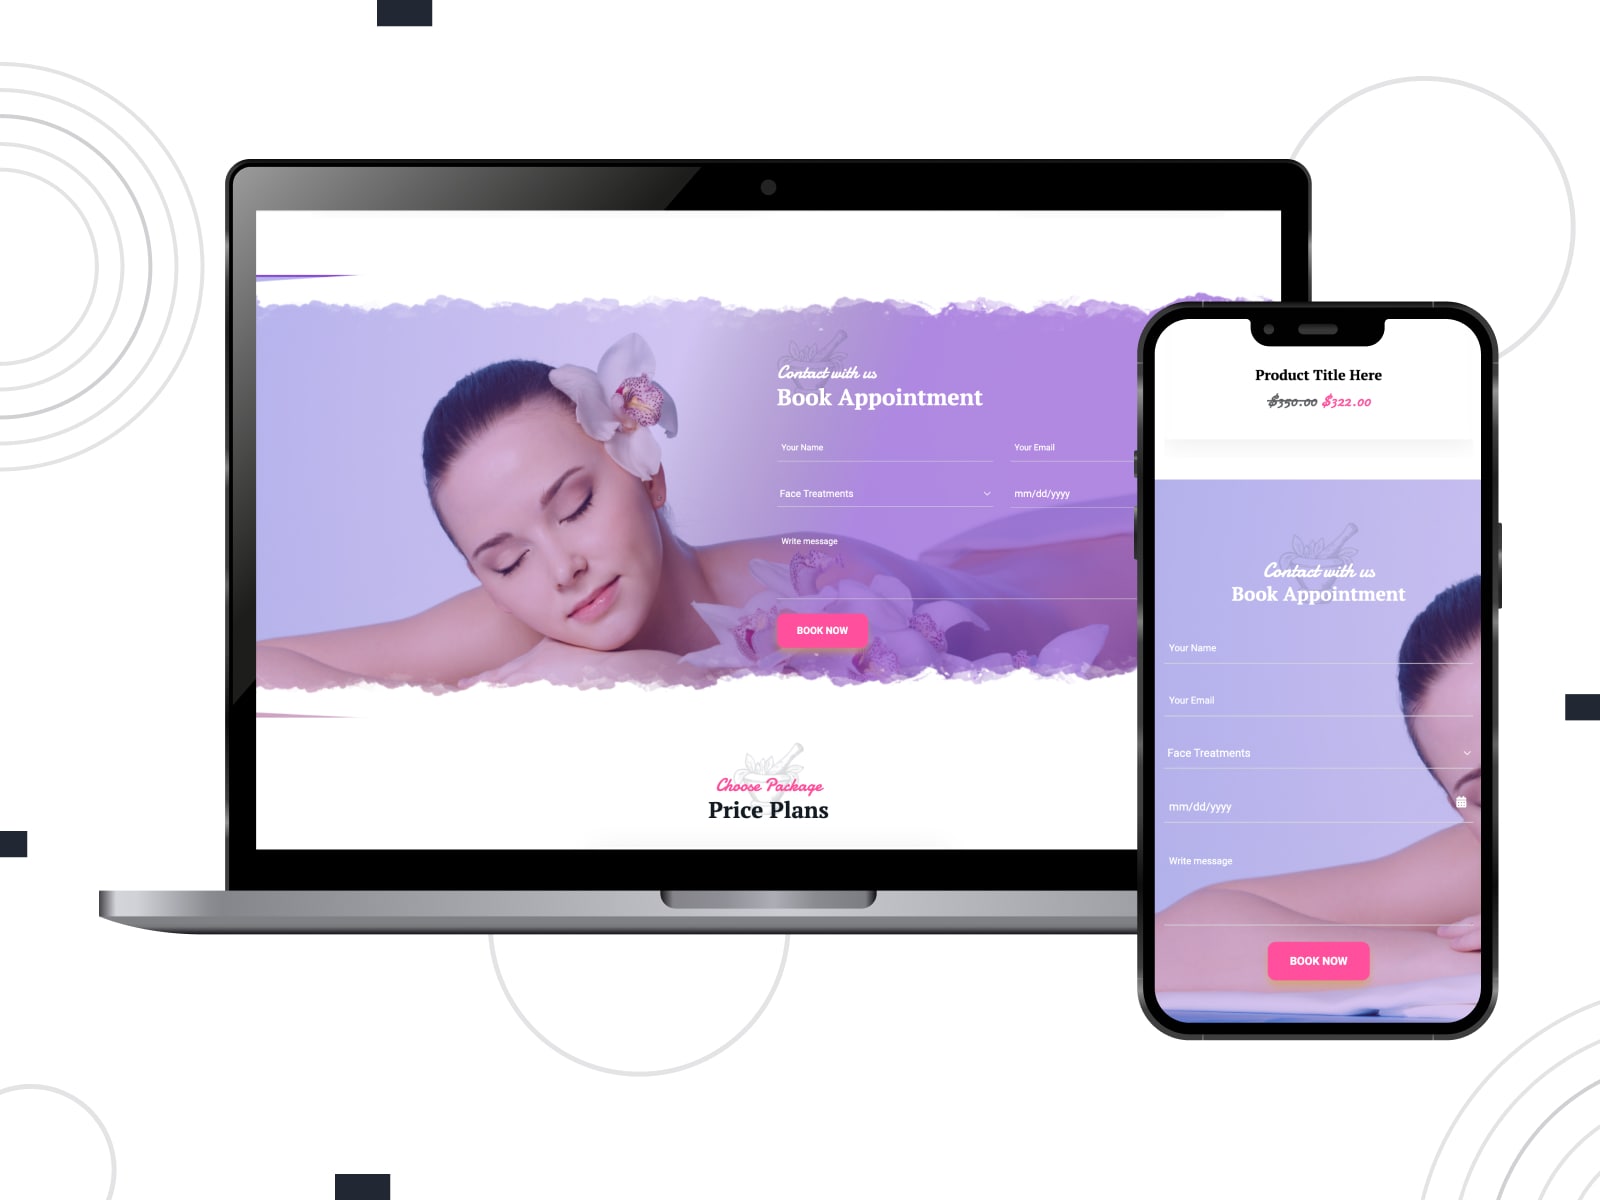 Picture of Spa Salon Center, a free and responsive WordPress theme suitable for appointment booking functionality with 4 sidebar layouts.